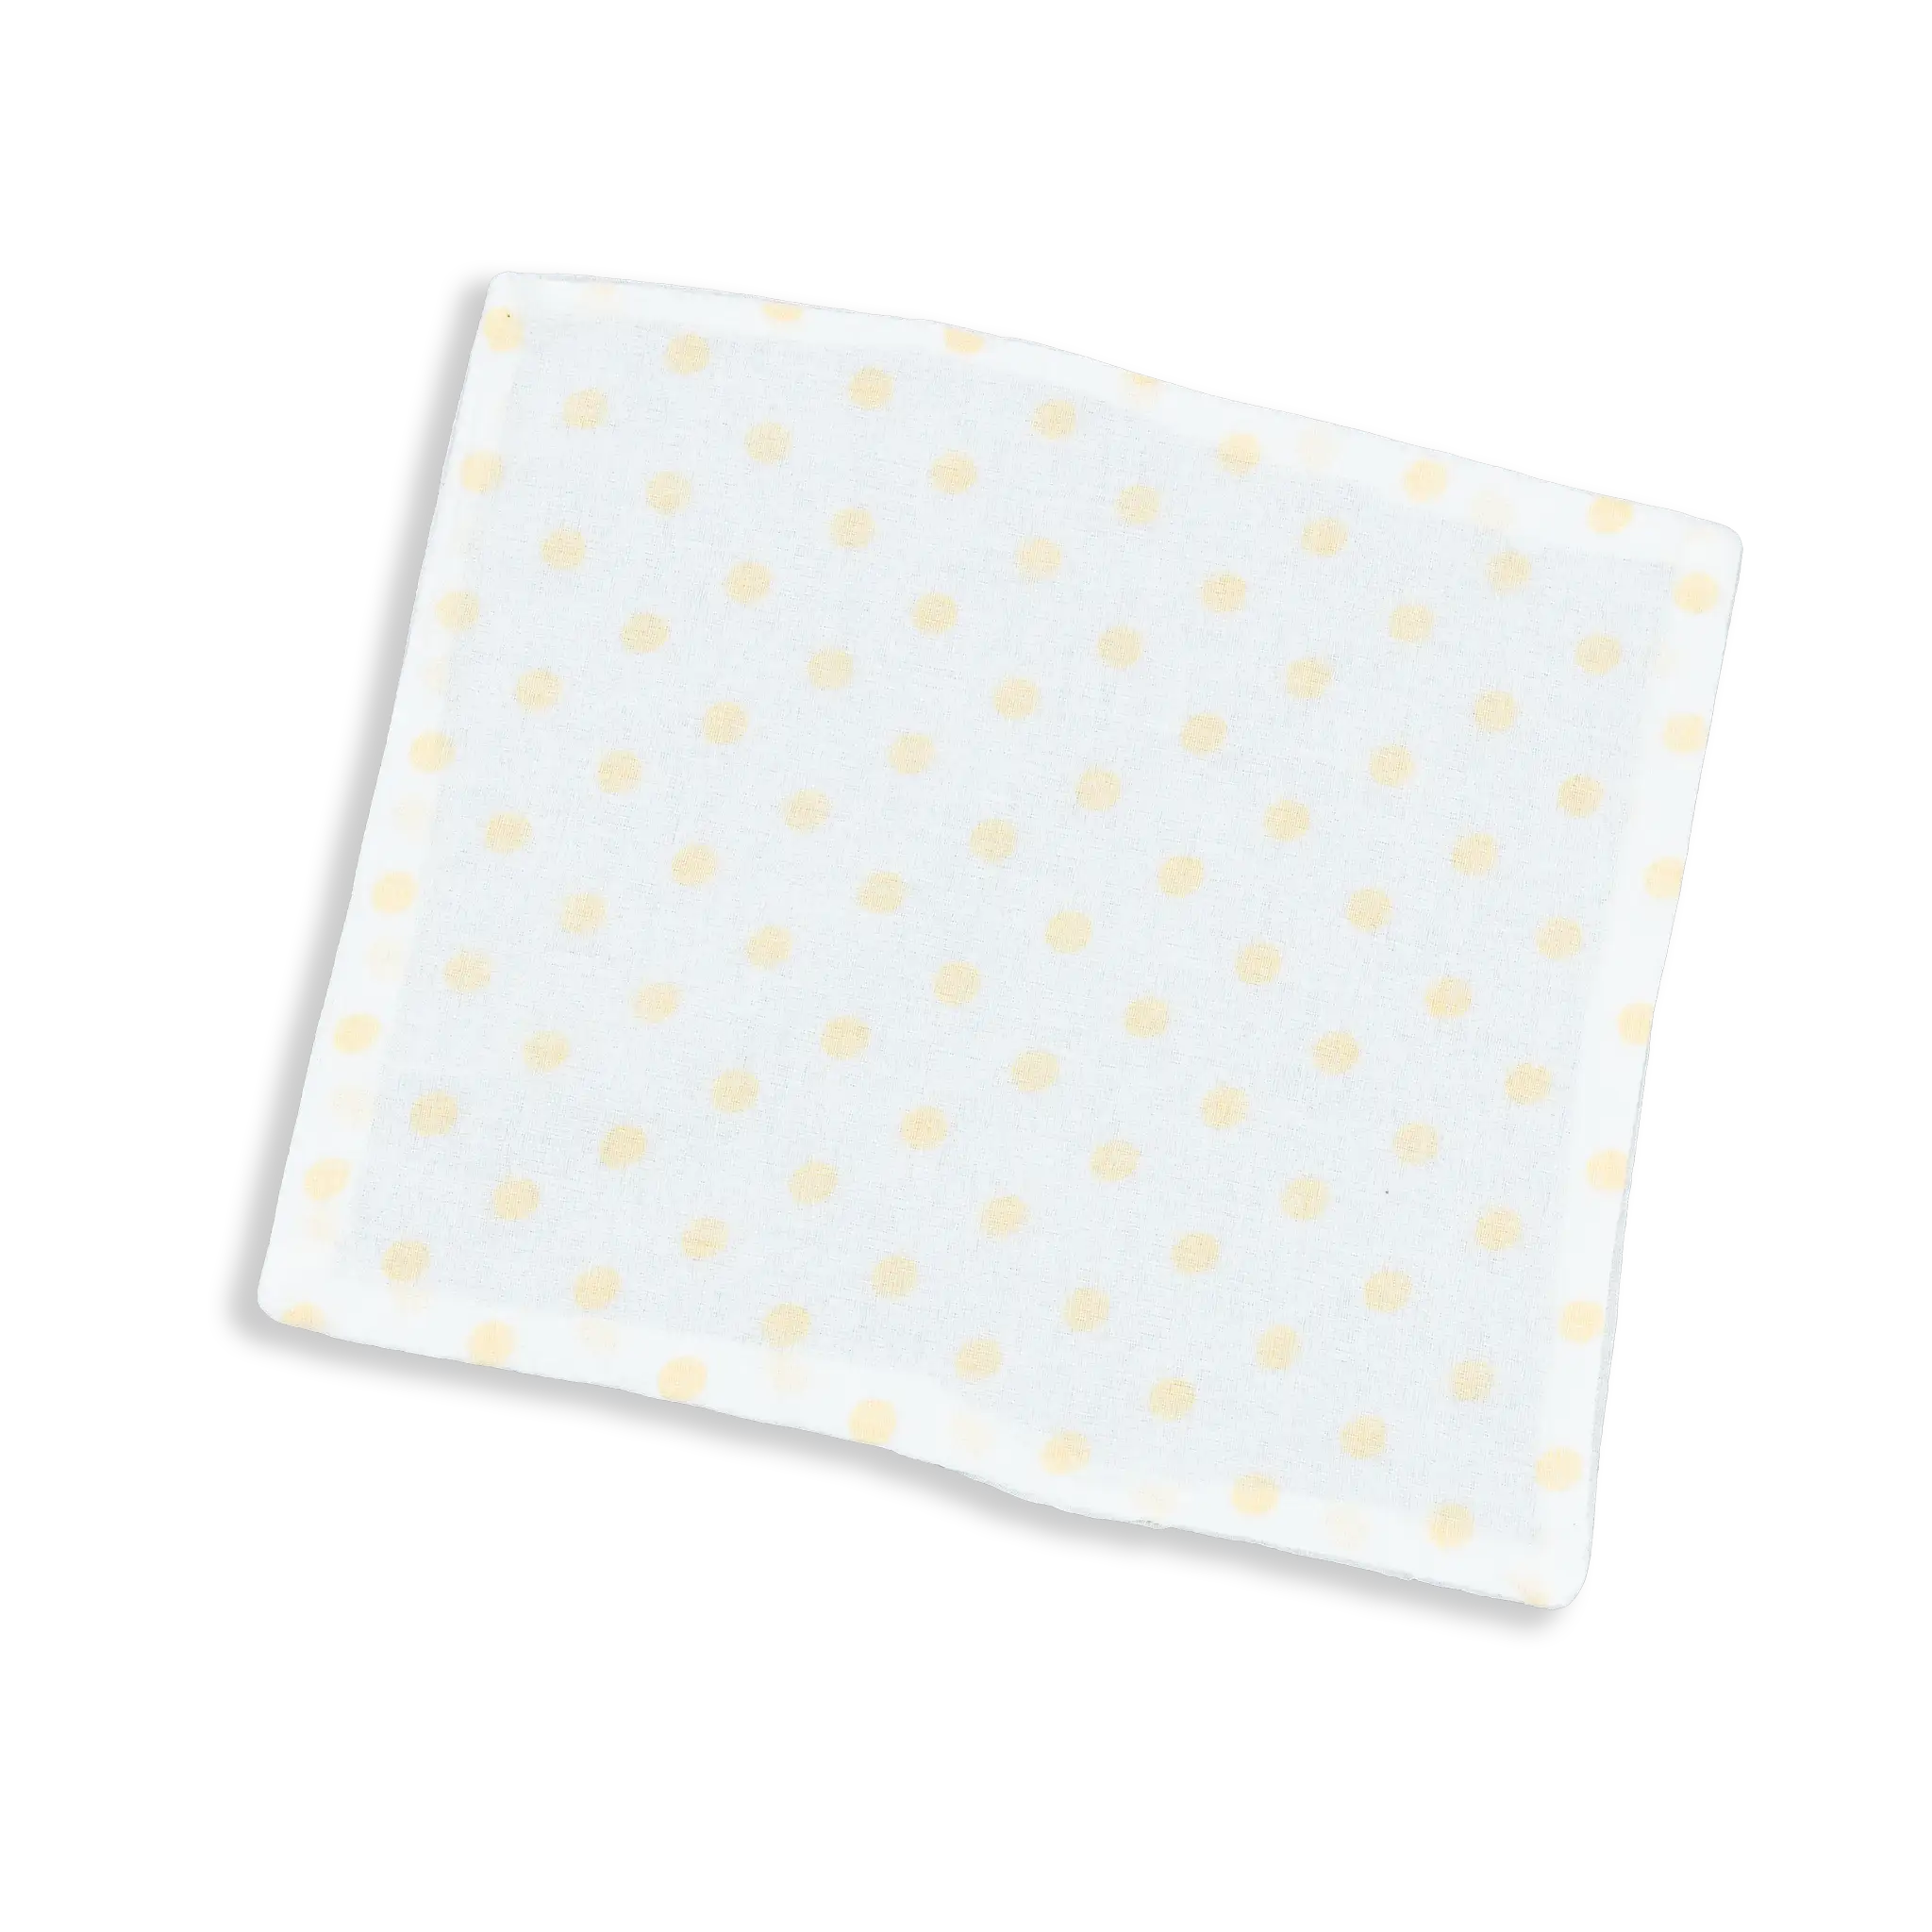 A Handkerchief is essential for newborns to keep tidy. This super-soft handkerchief is made with 3 layers of the finest muslin cotton fabric.